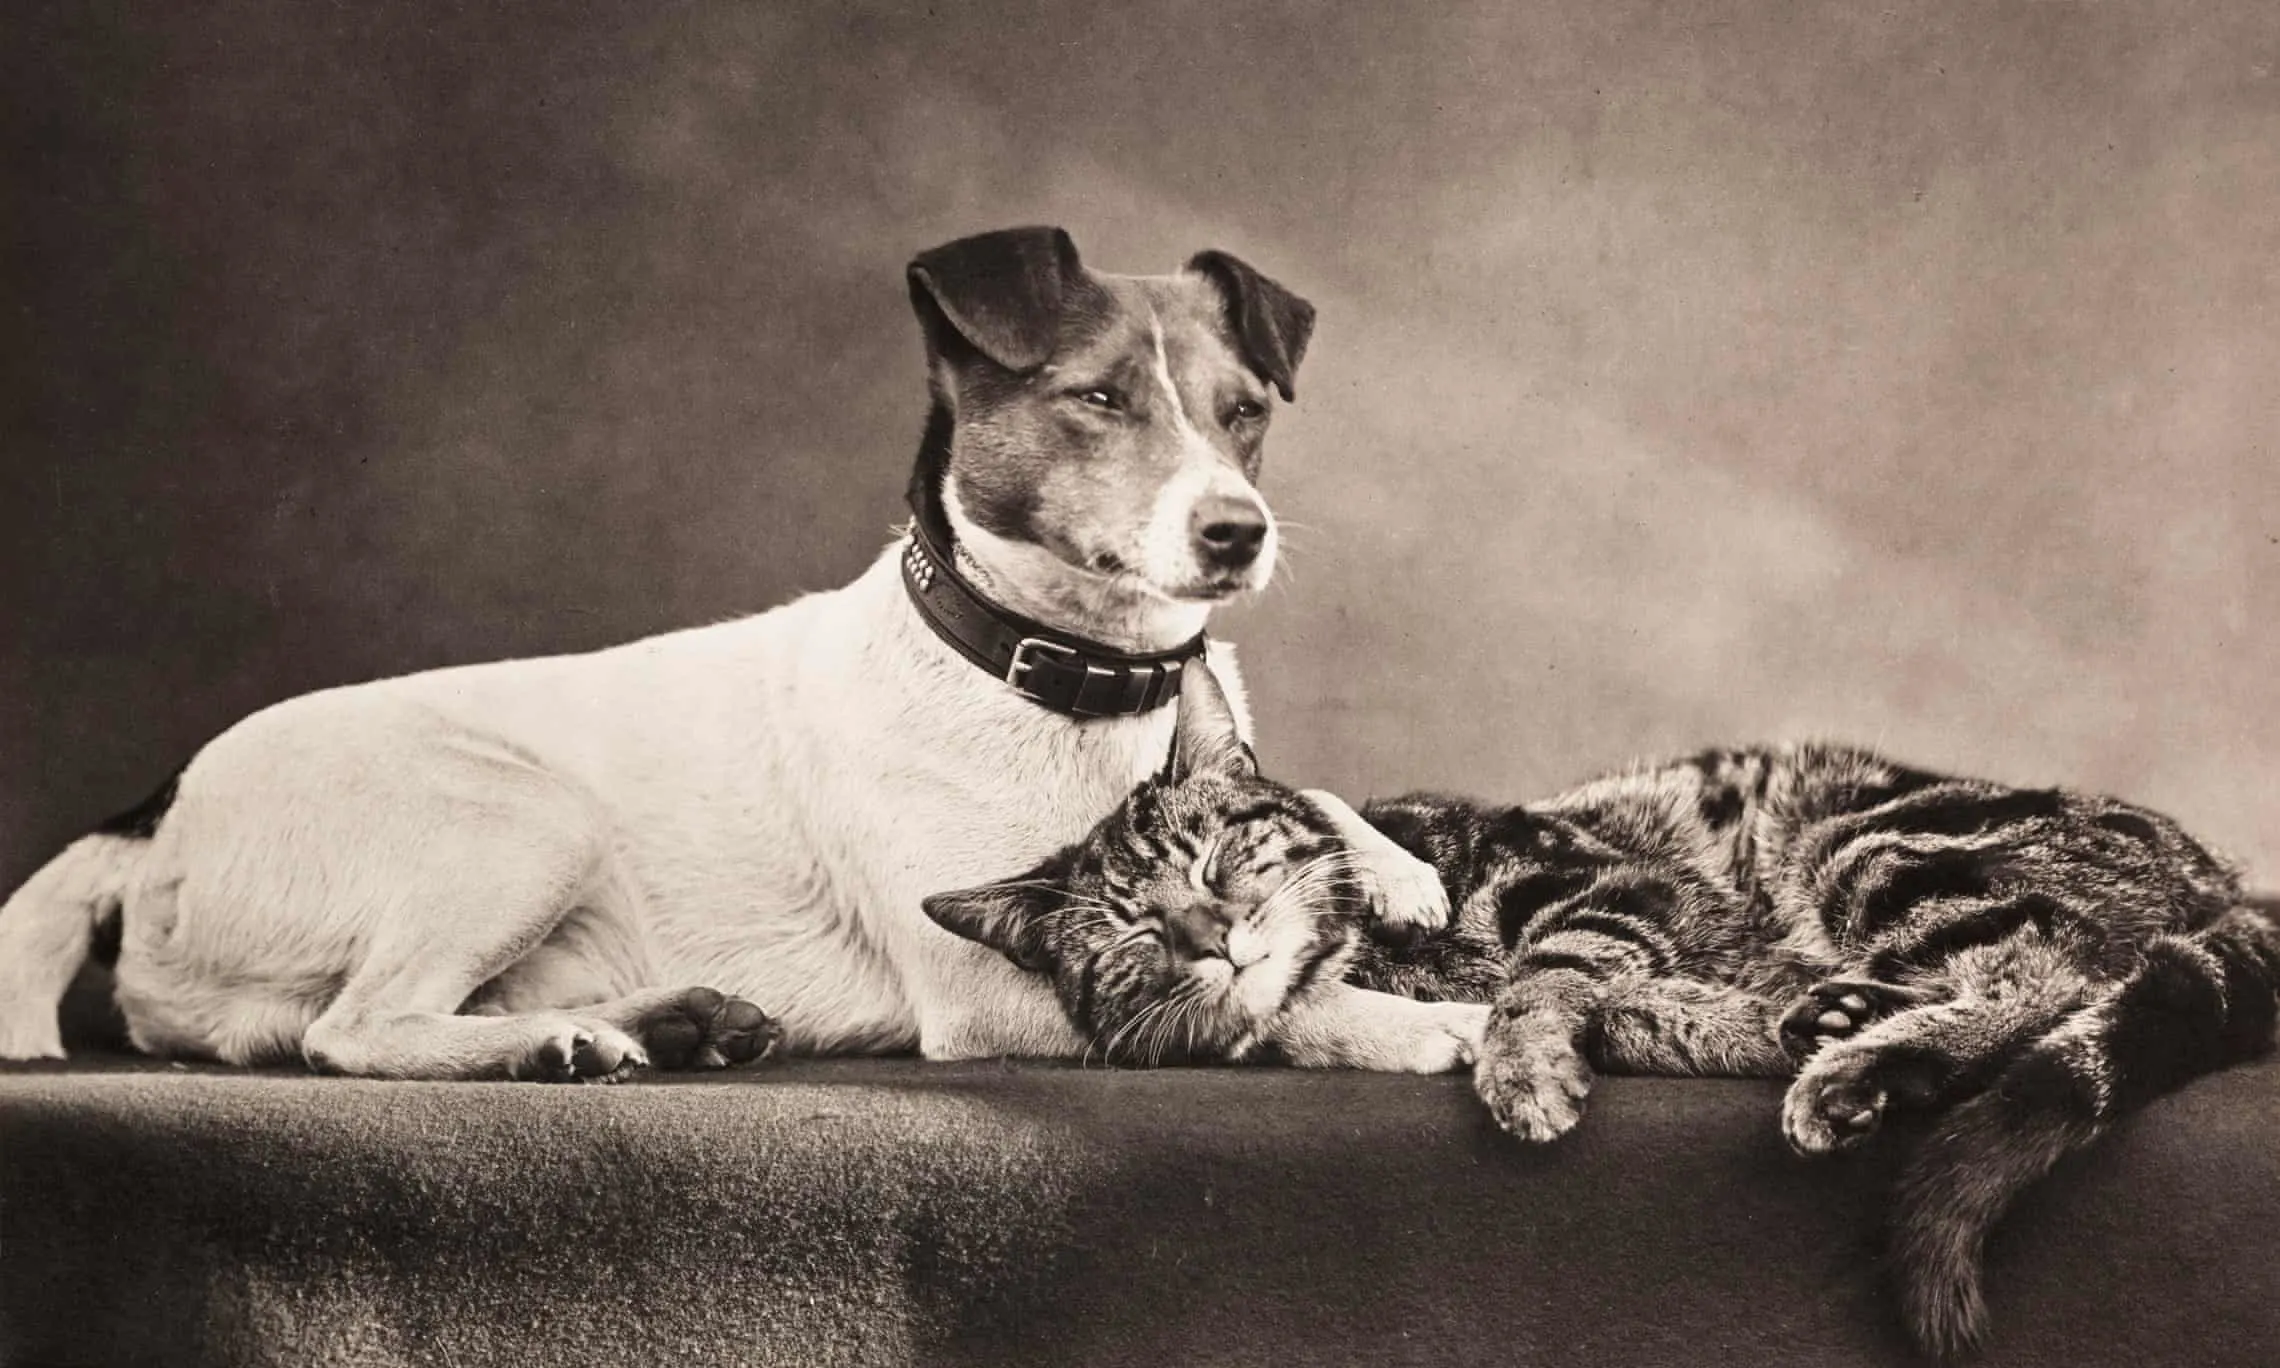 dog and cat photographed together in victorian era